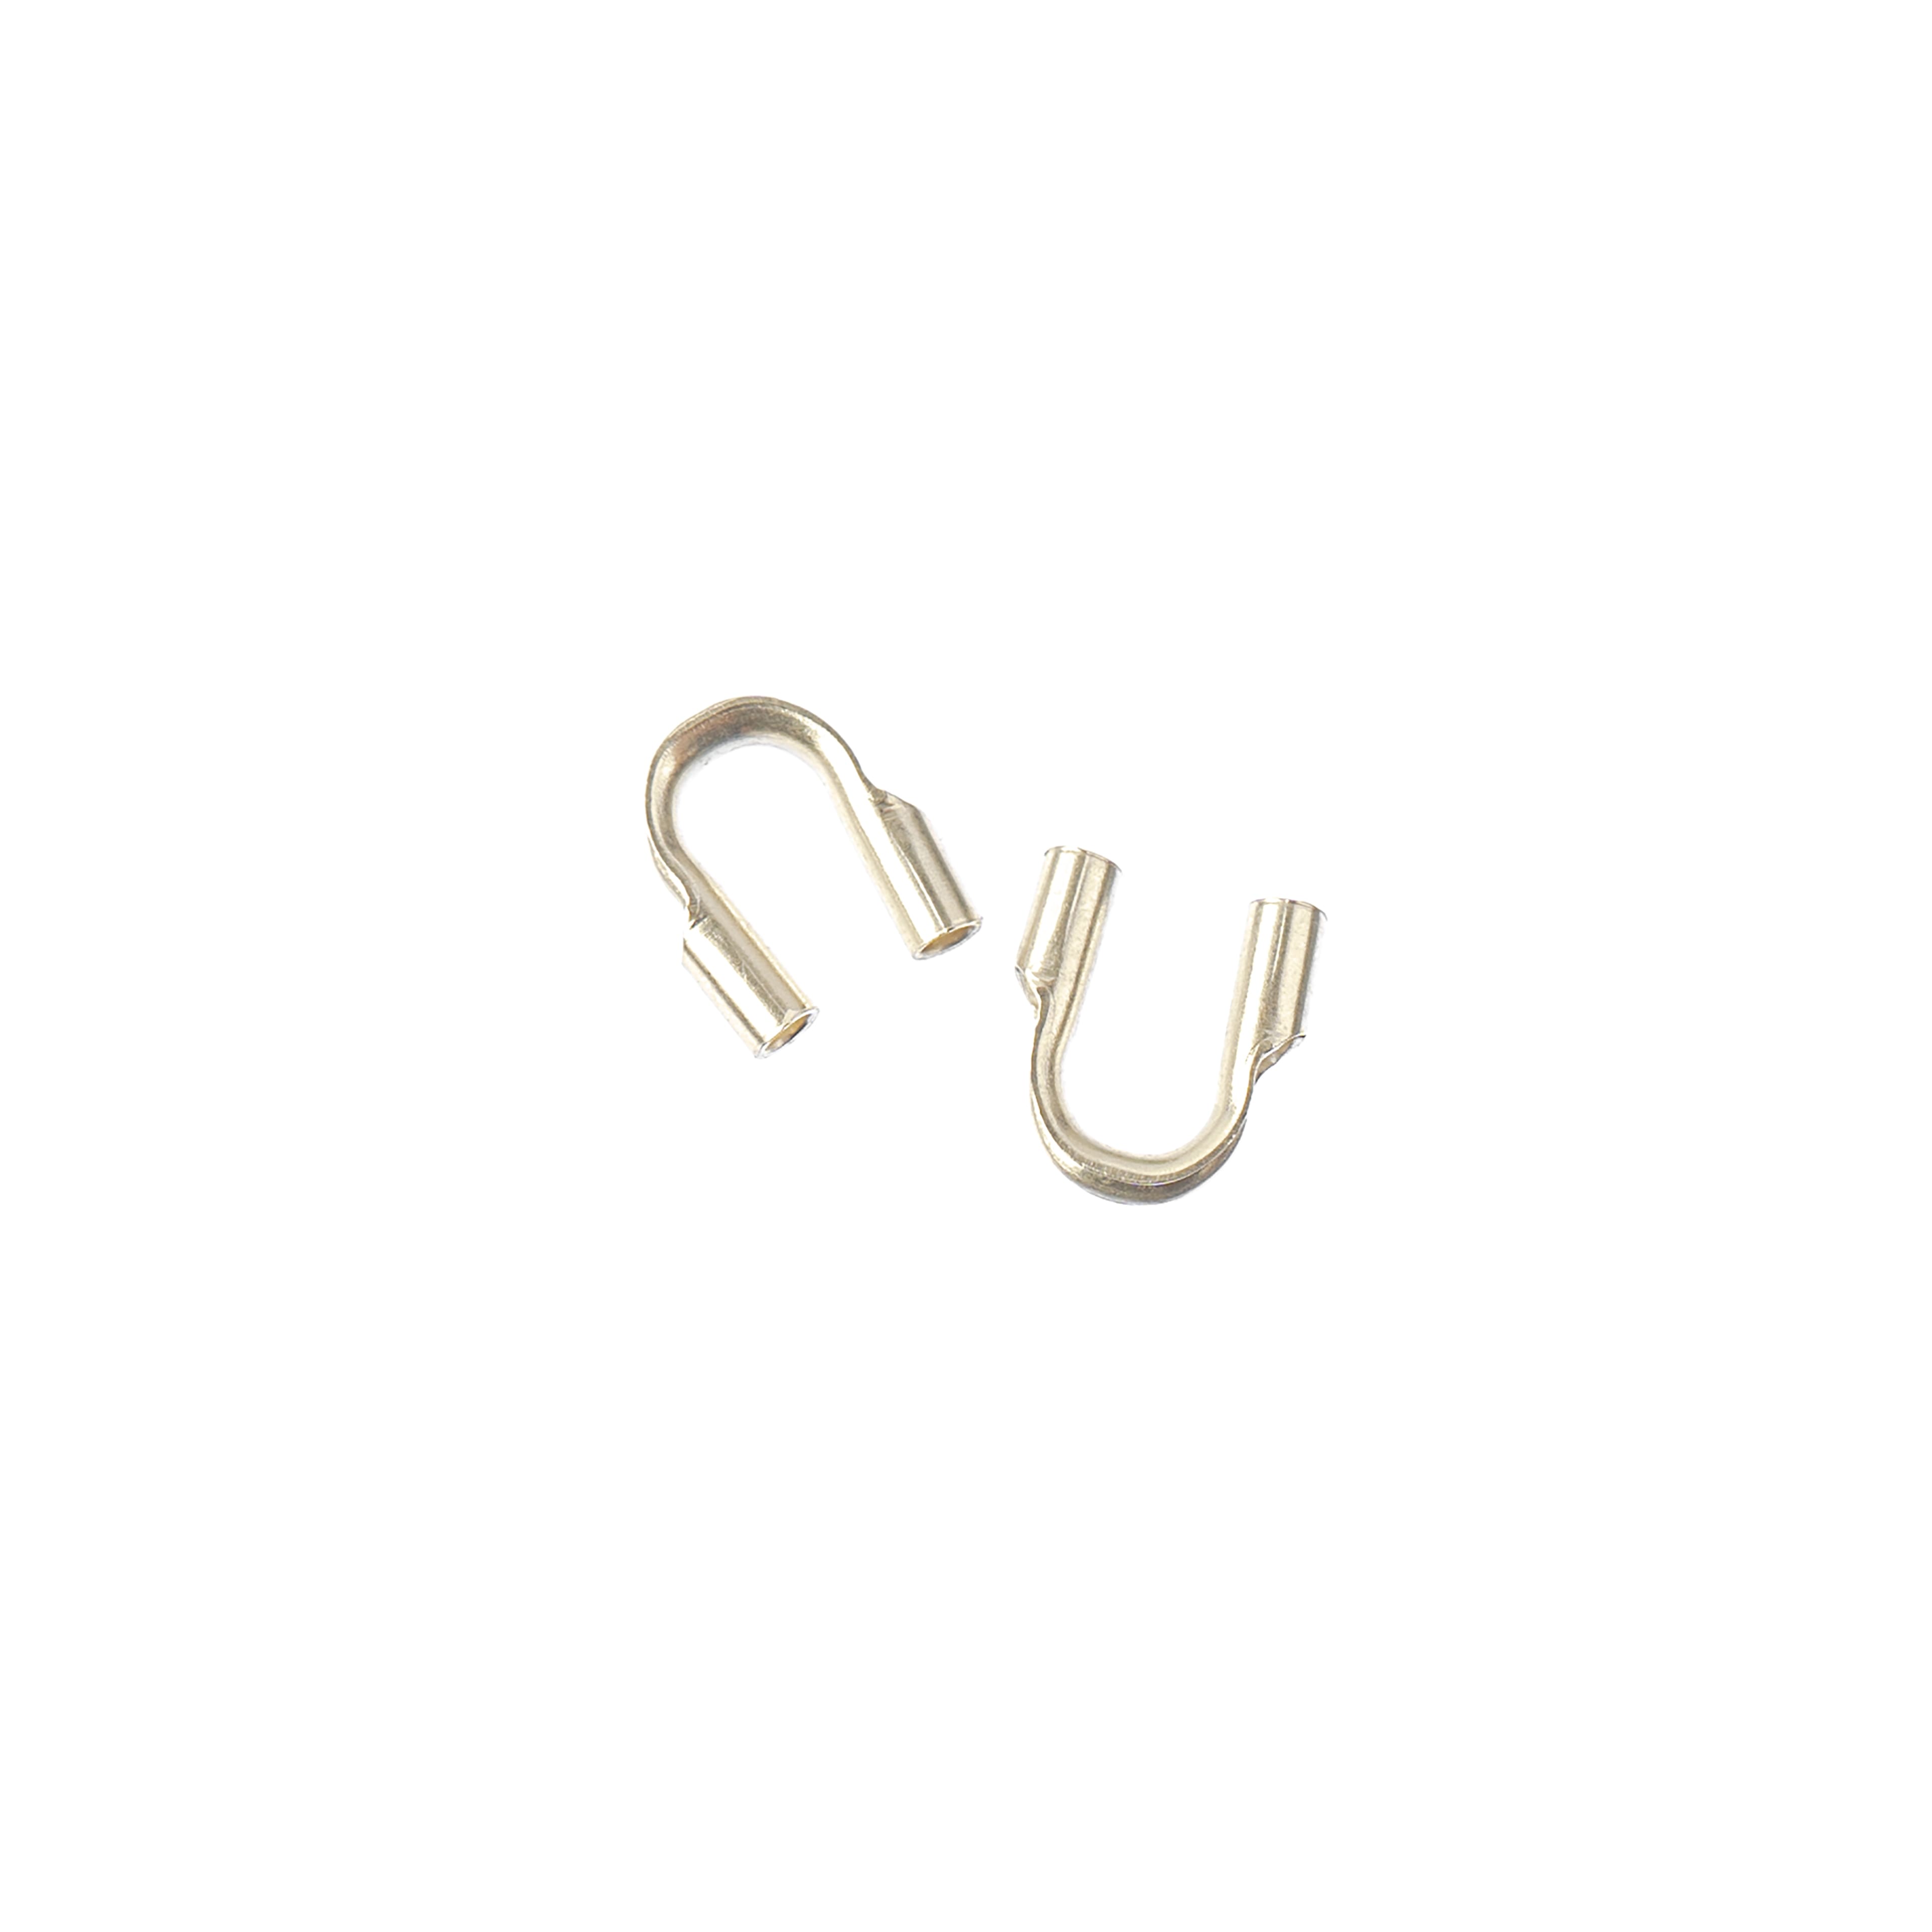 Silver Wire Value Pack by Bead Landing™